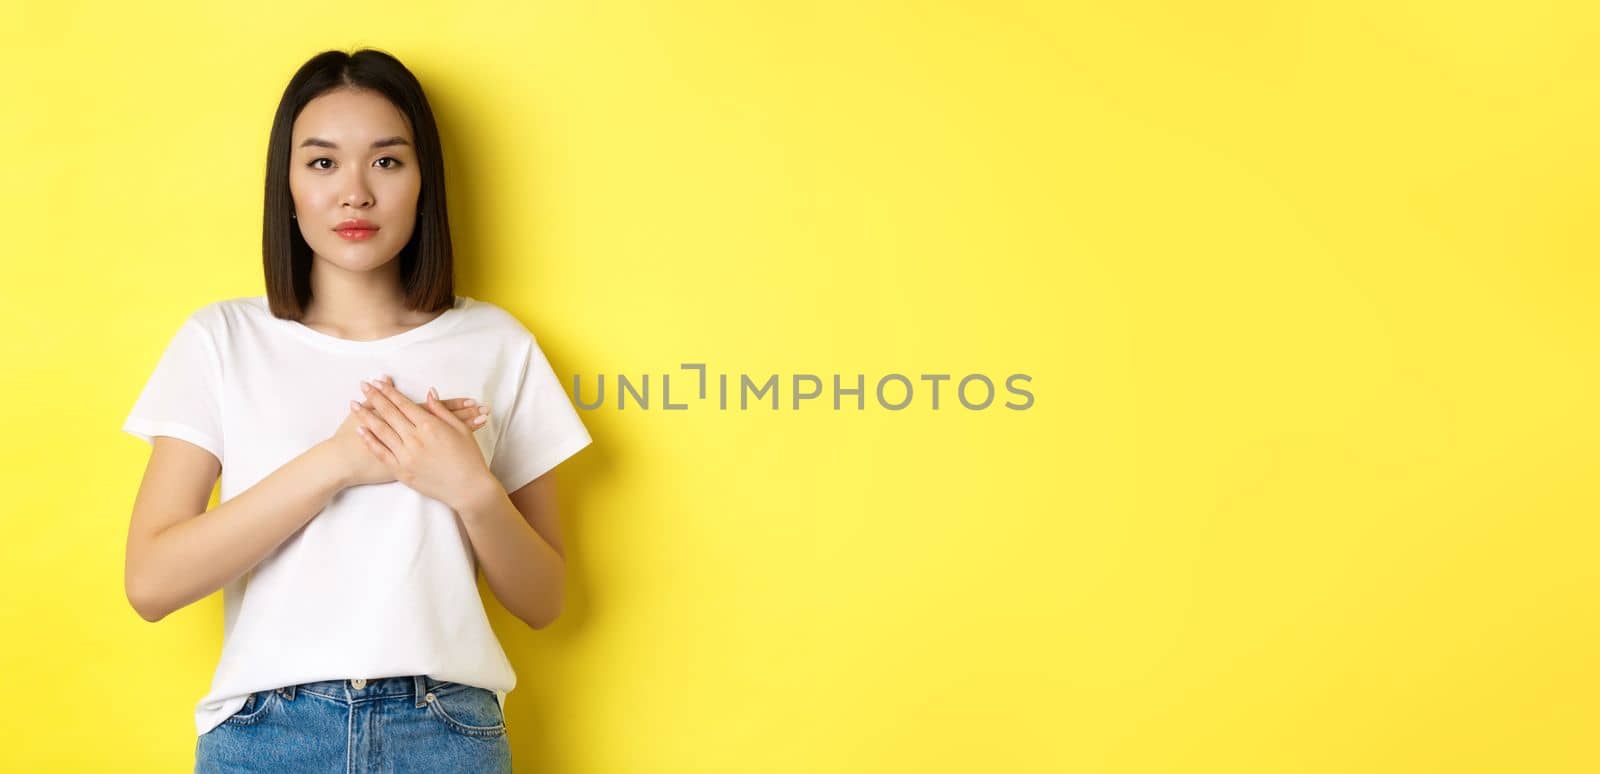 Beauty and fashion concept. Beautiful asian woman holding hands on heart and looking thoughtful at camera, keeping memories in soul, standing over yellow background.